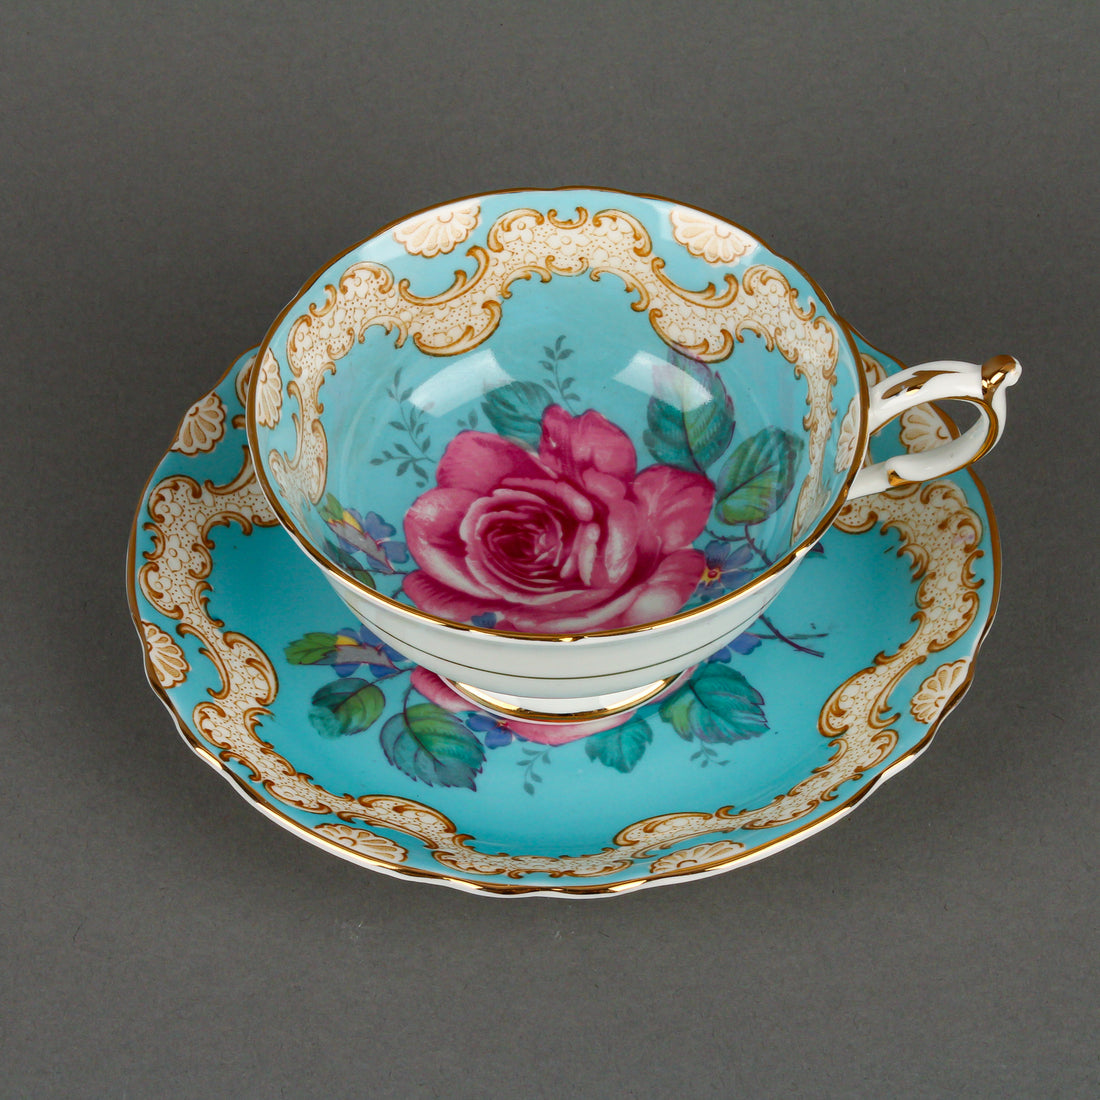 PARAGON A1084/2 Hand-Painted Cabbage Rose Cup & Saucer